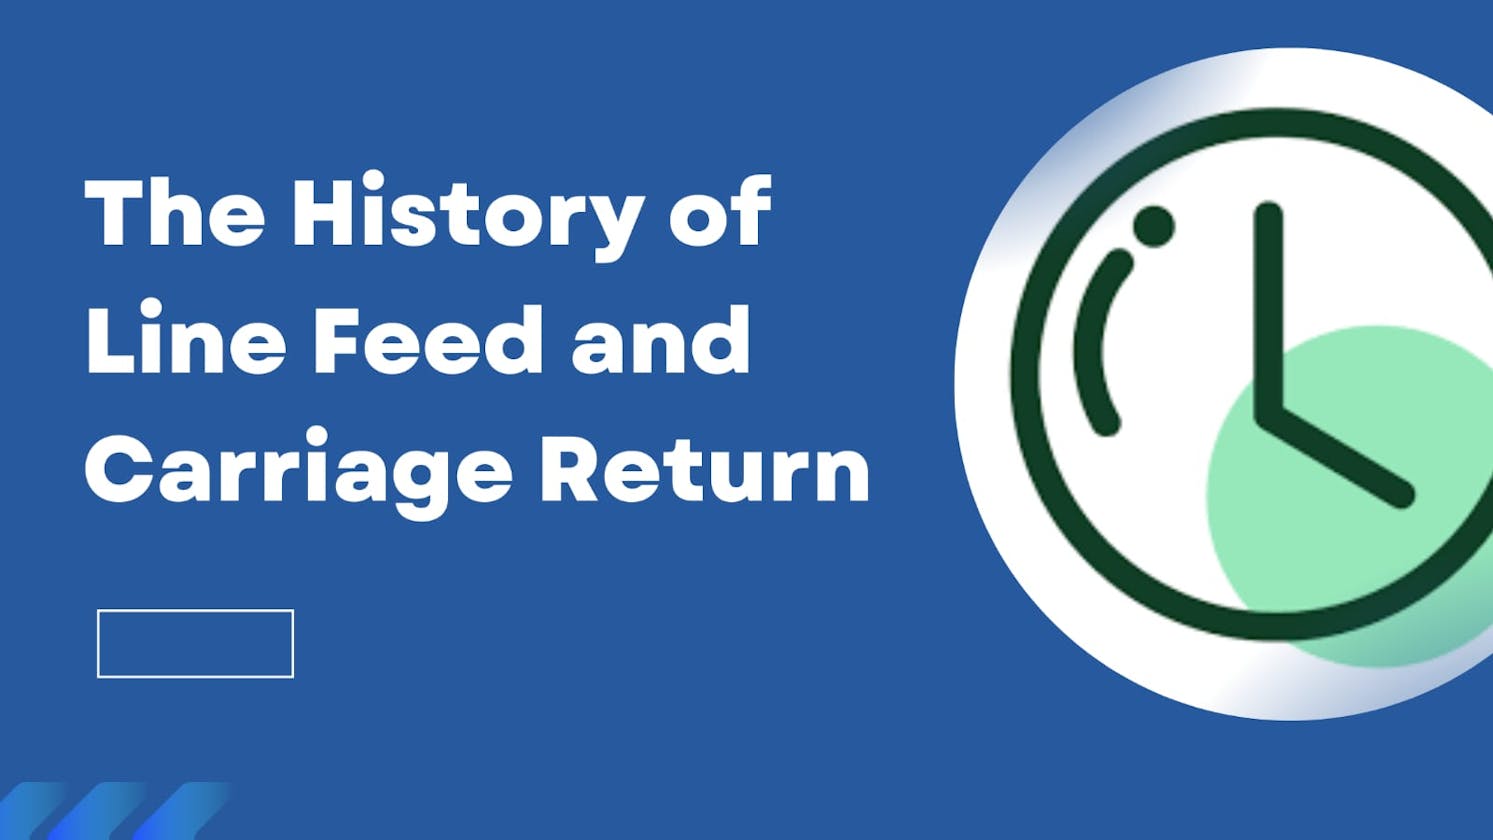 The History of Line Feed and Carriage Return